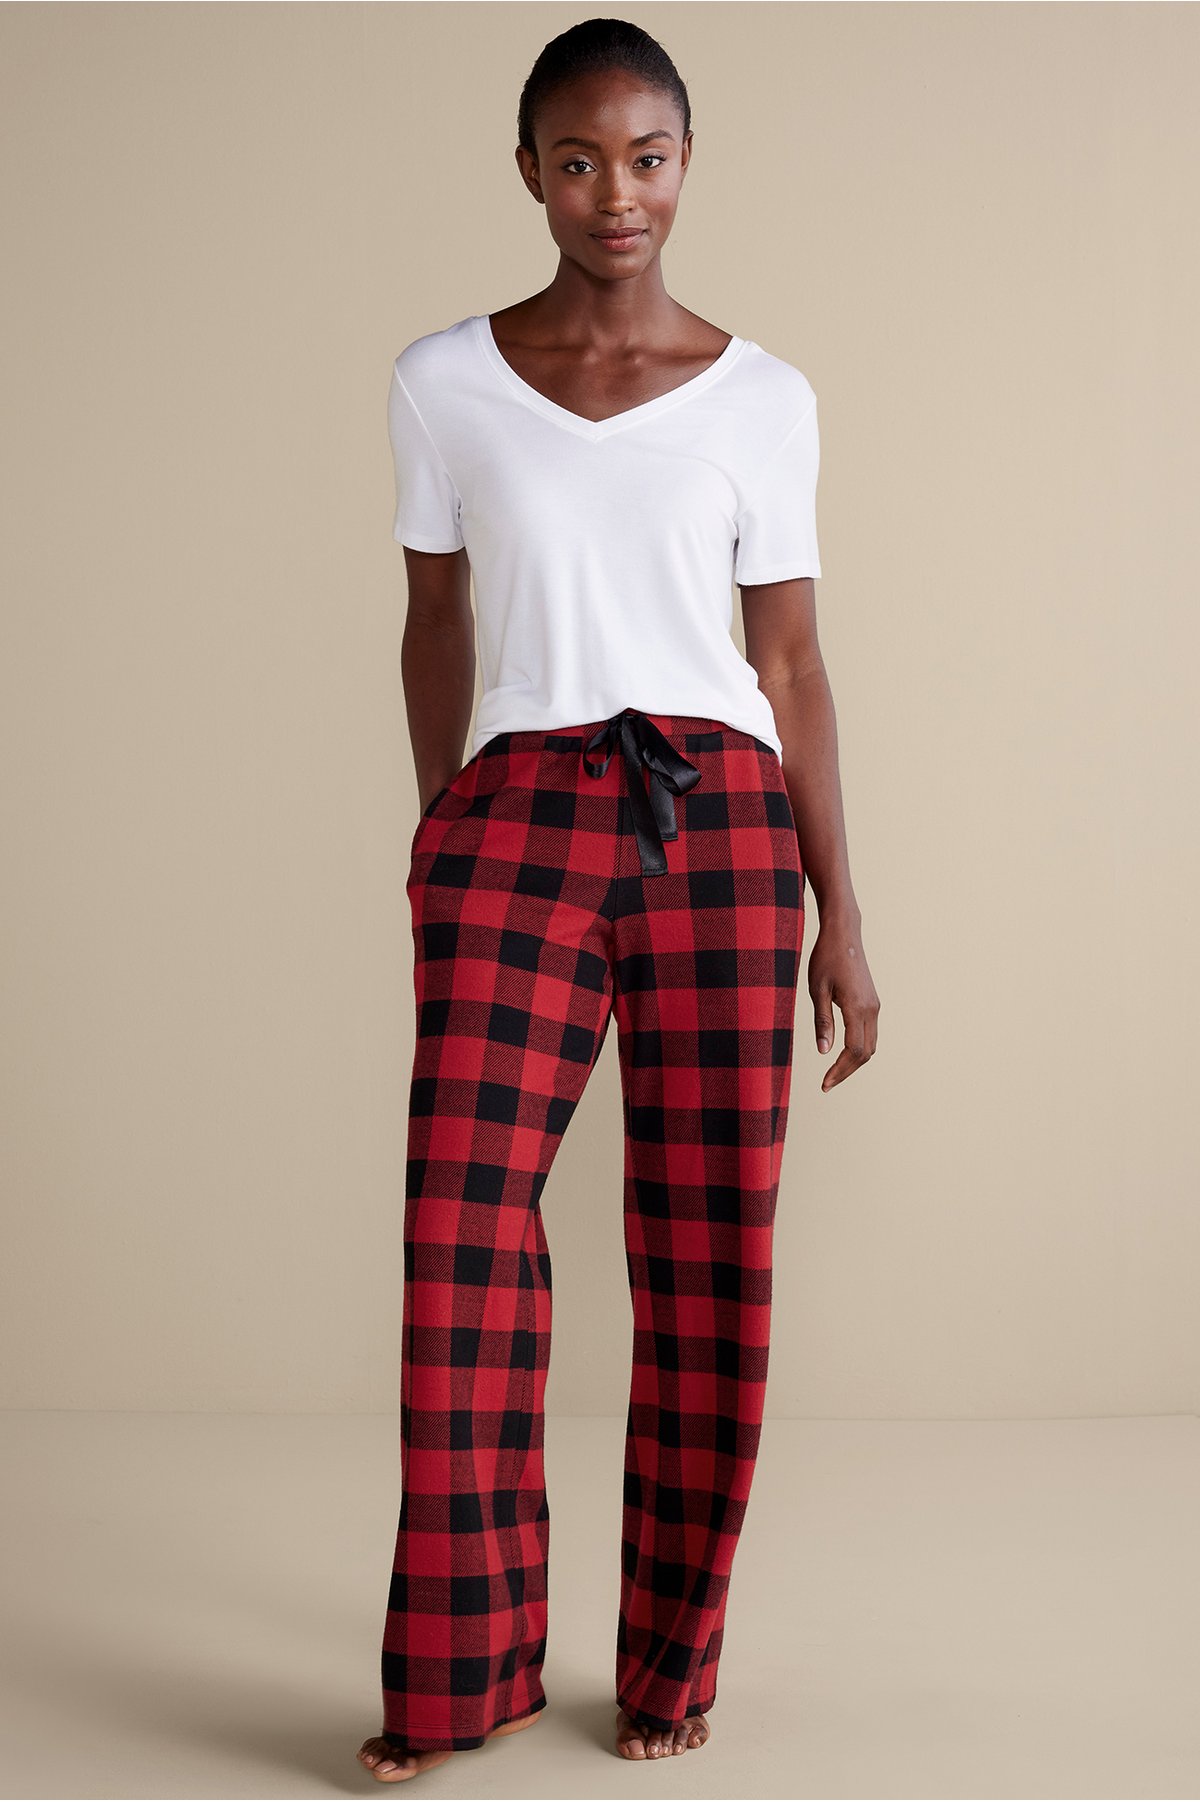 Women's Petites Mad About Plaid Pant by Soft Surroundings, in Red Plaid size PM (10-12)